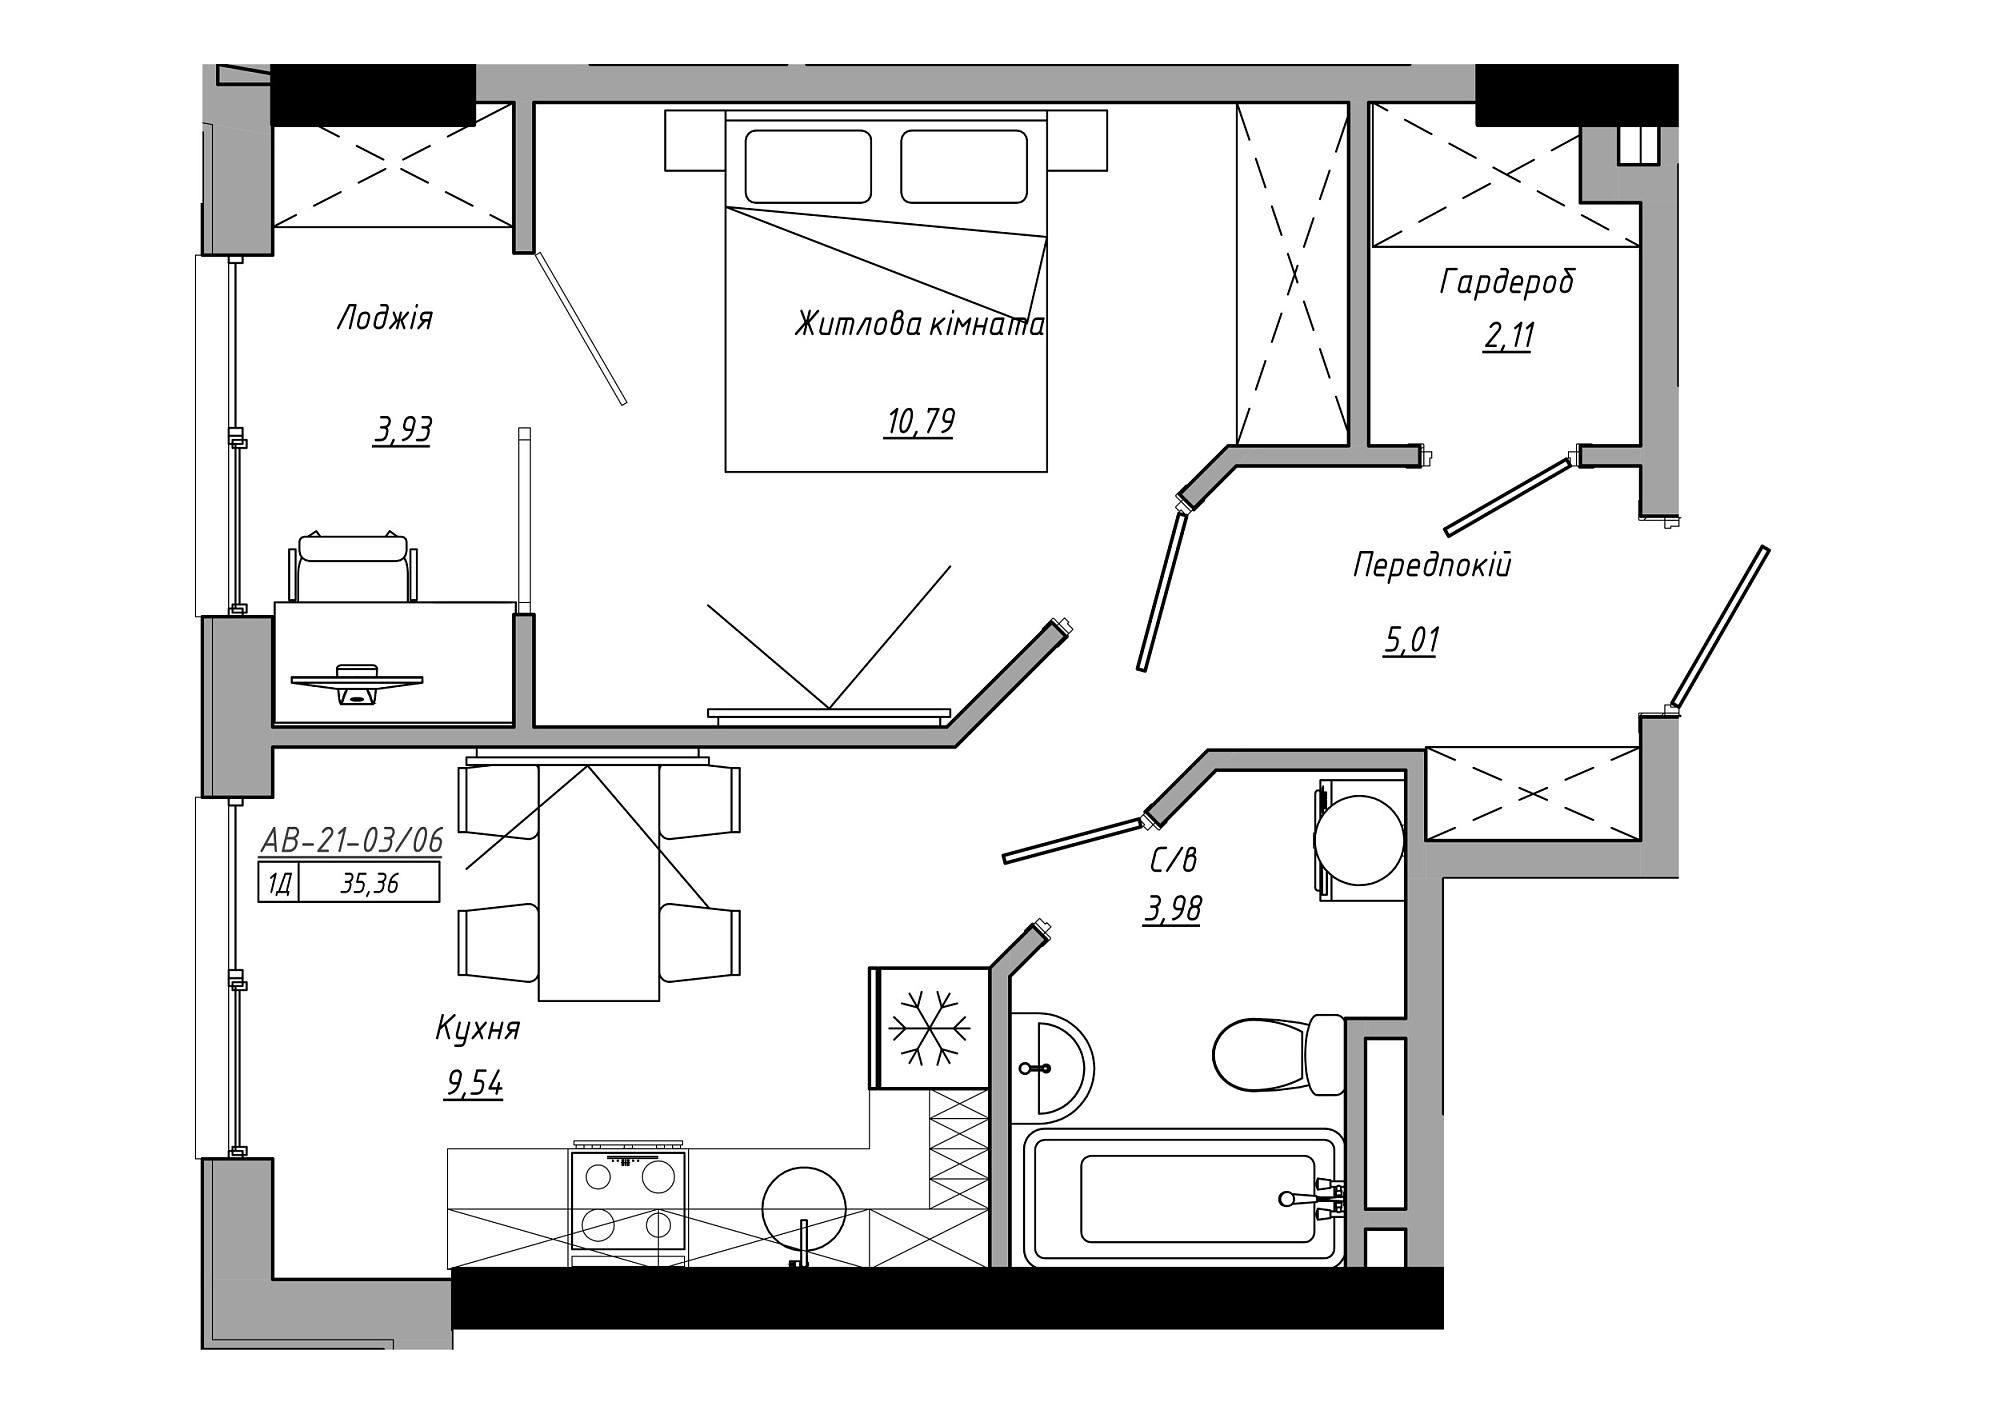 Planning 1-rm flats area 35.36m2, AB-21-03/00006.